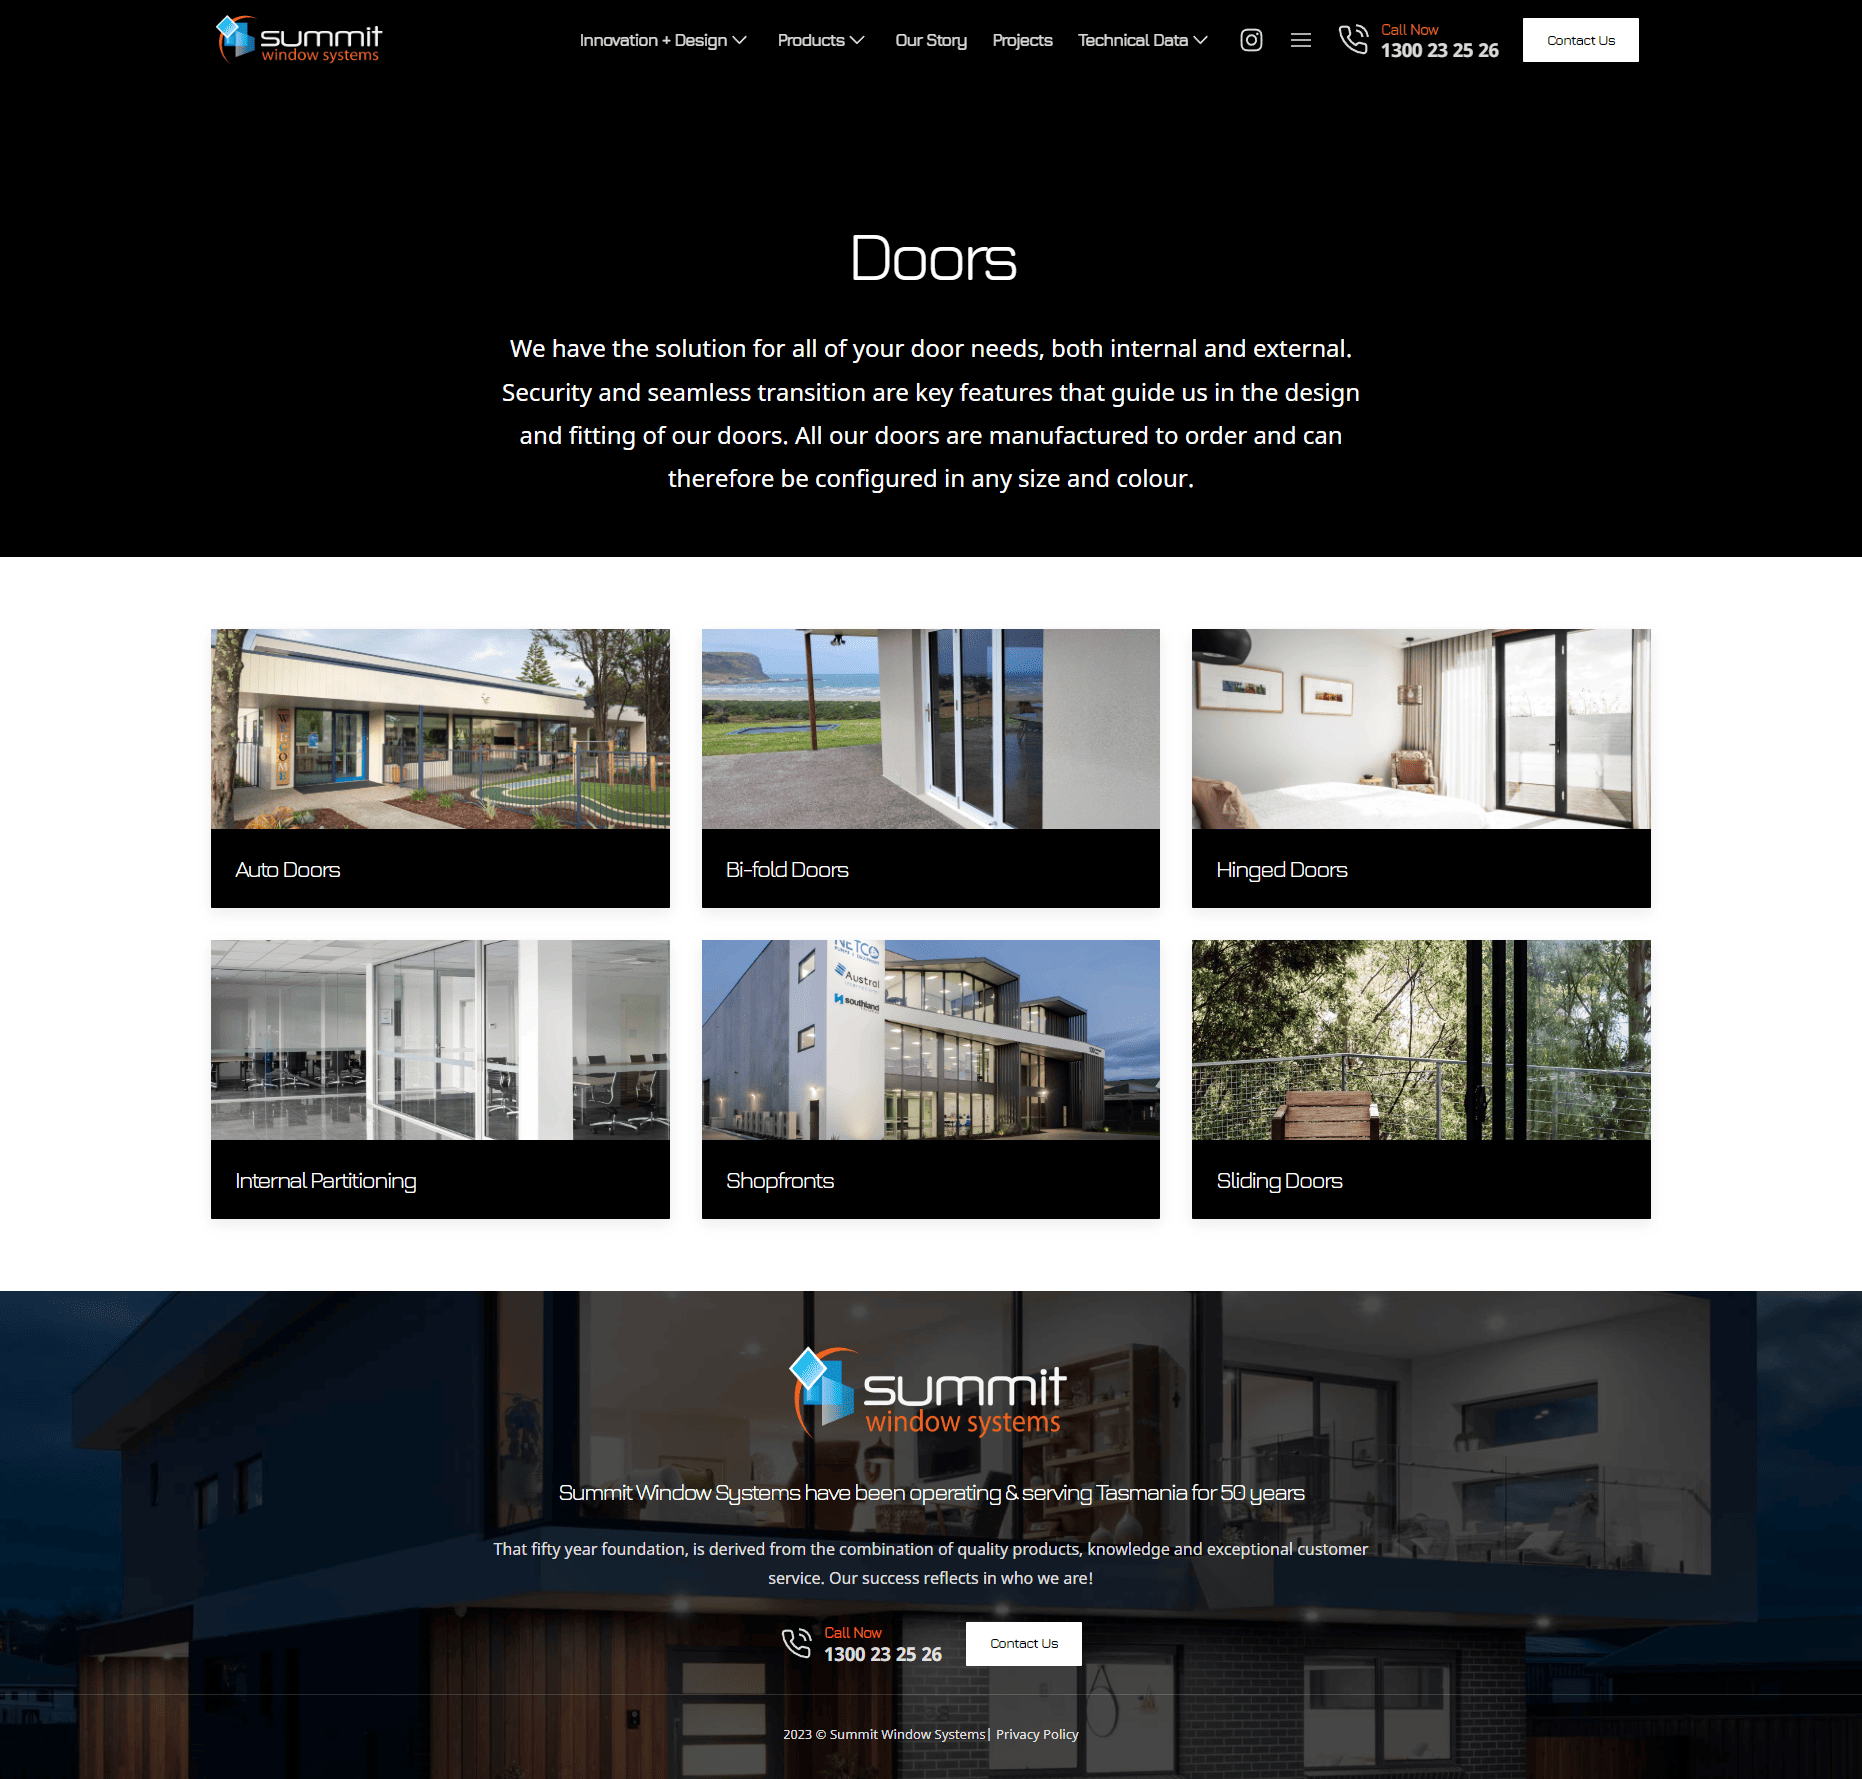 A website design for a window and door company.